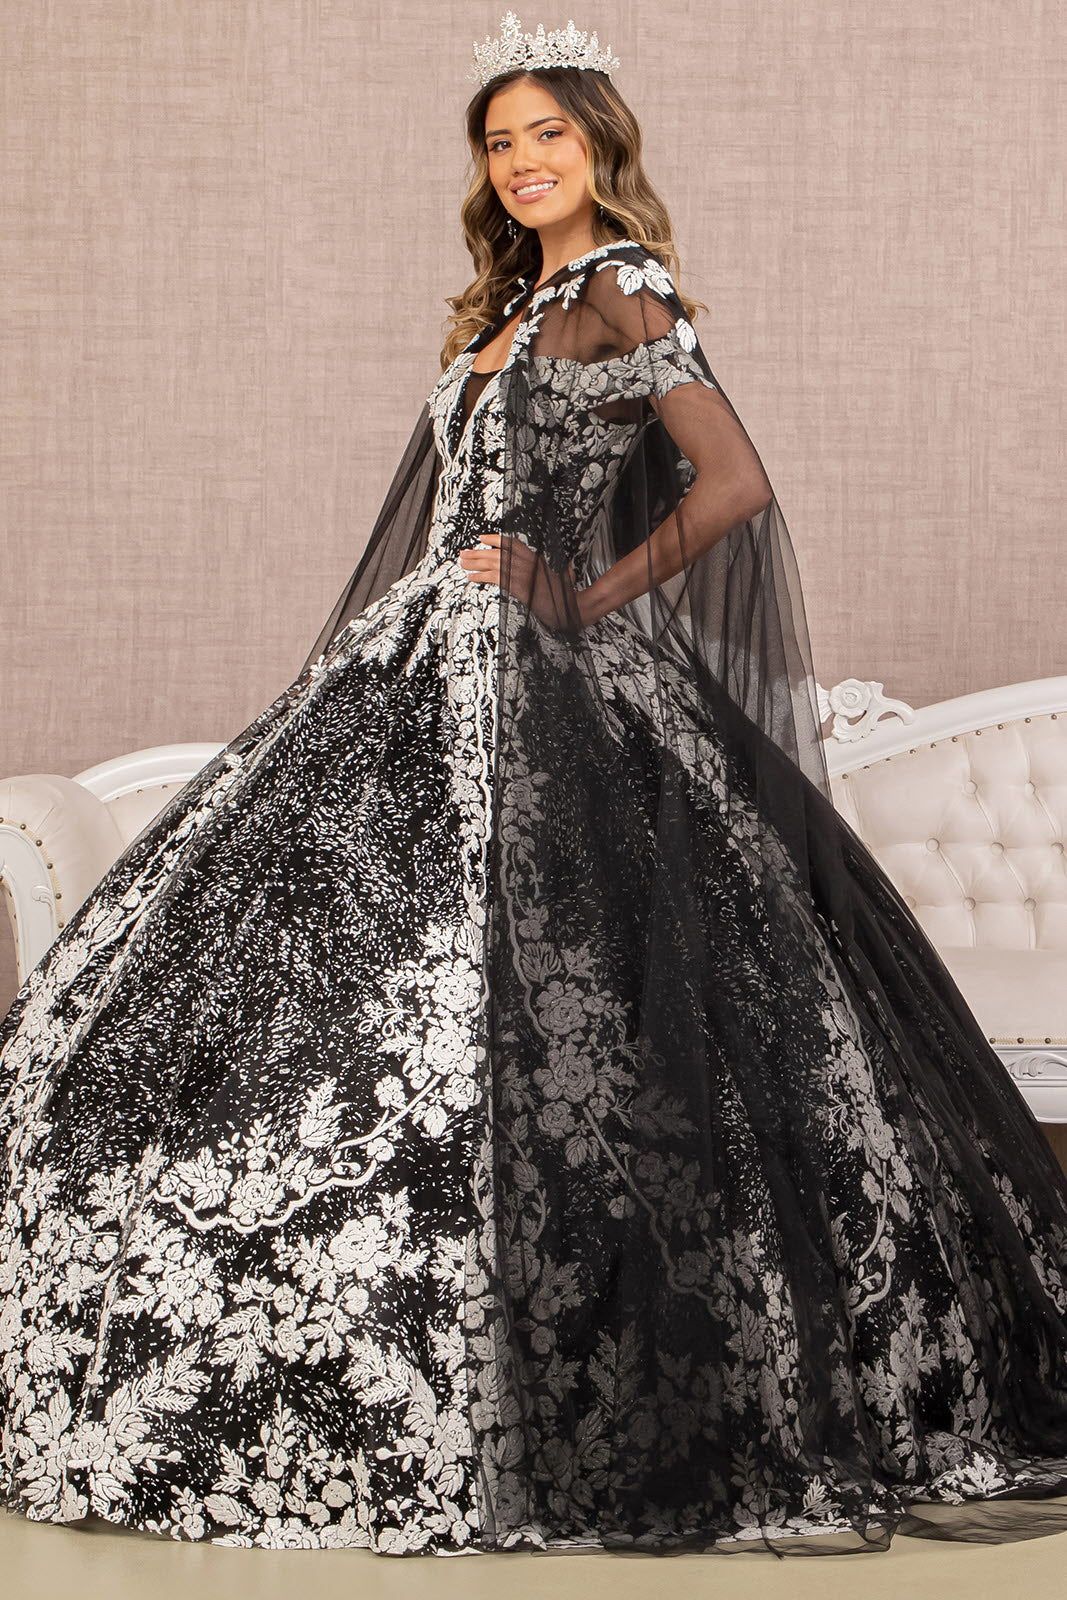 Floral Pattern Glitter Quinceanera Gown Long Mesh Cape GLGL3168-QUINCEANERA-smcfashion.com